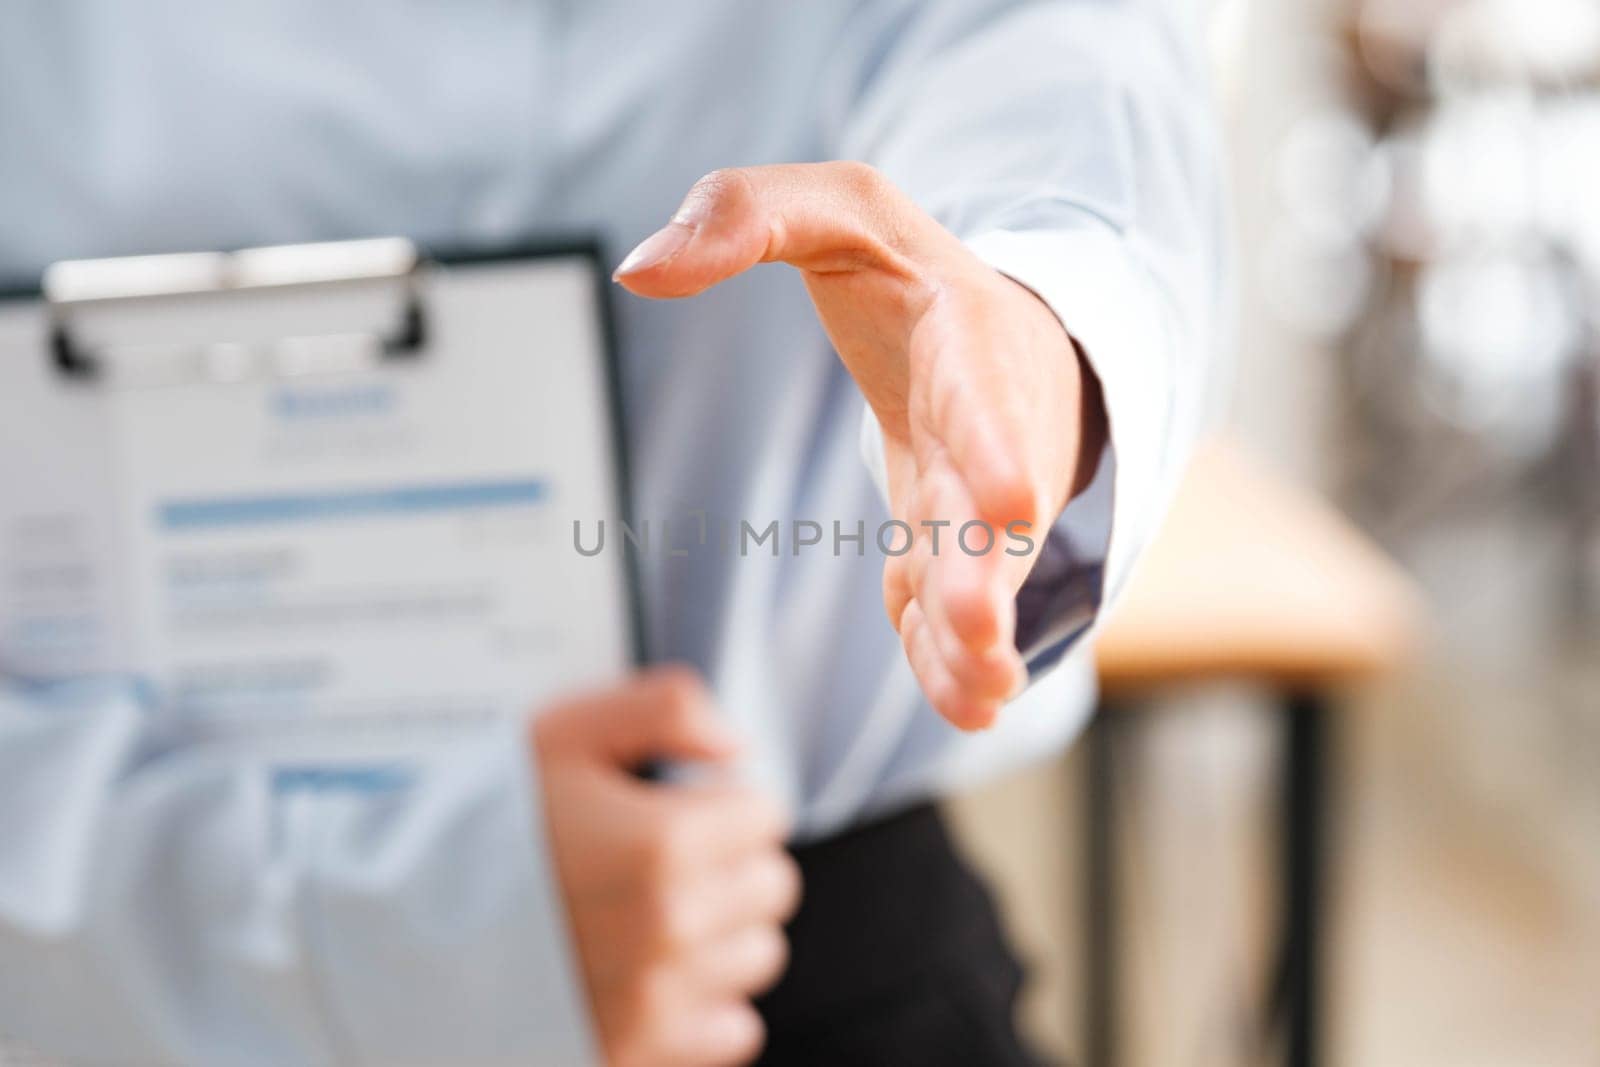 Business Professional Extending Hand for a Handshake, Gesture of Introduction or Agreement with Clipboard in Background